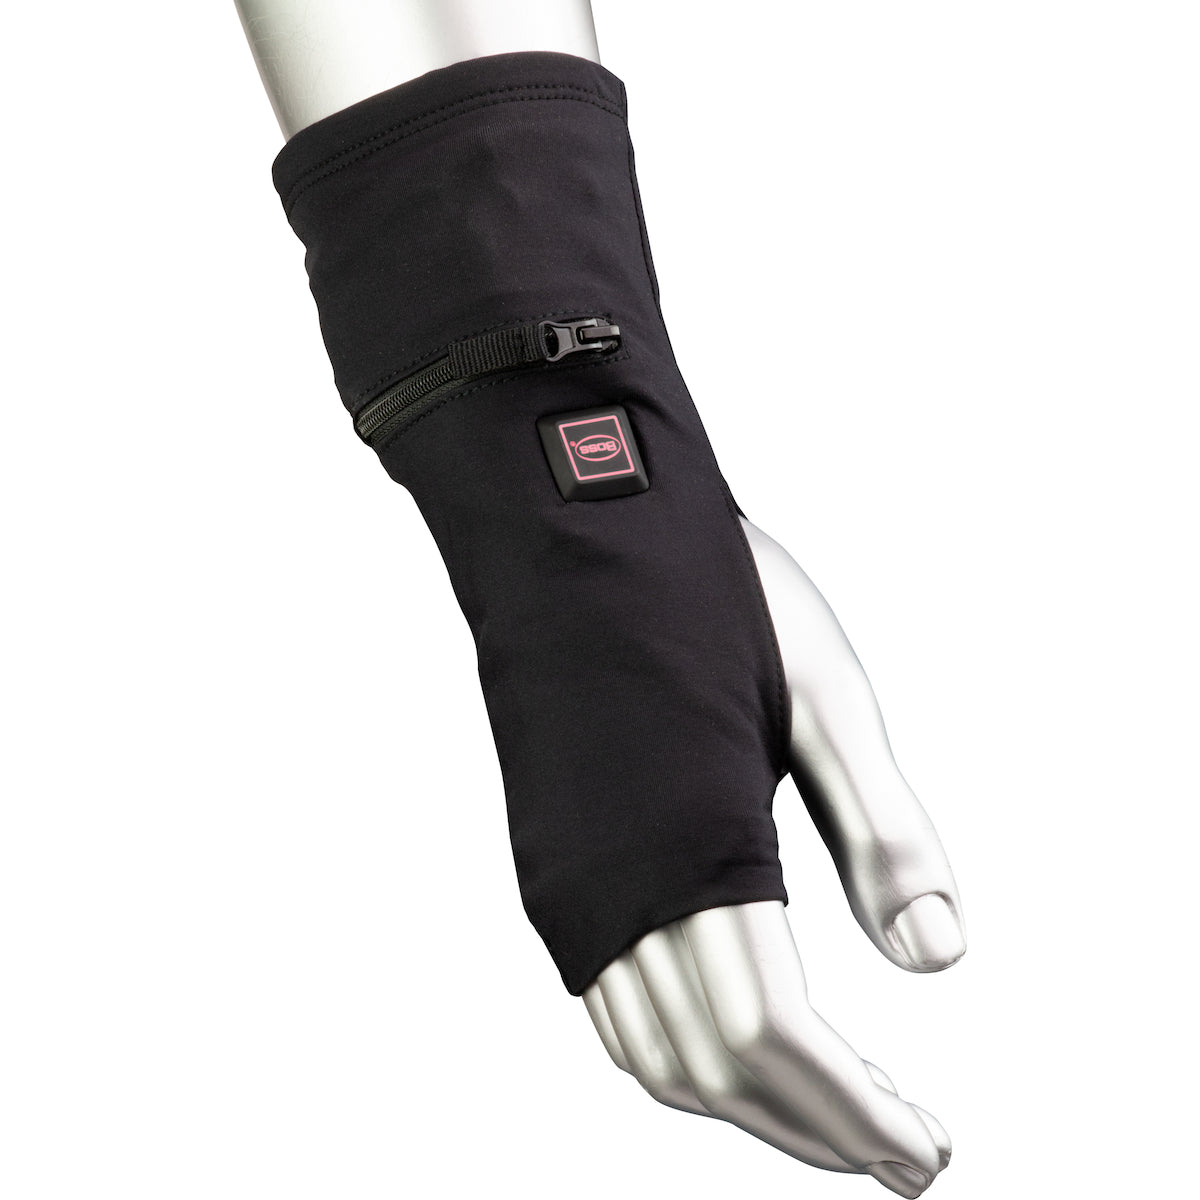 Boss 399-HG20 Therm Heated Glove Liner